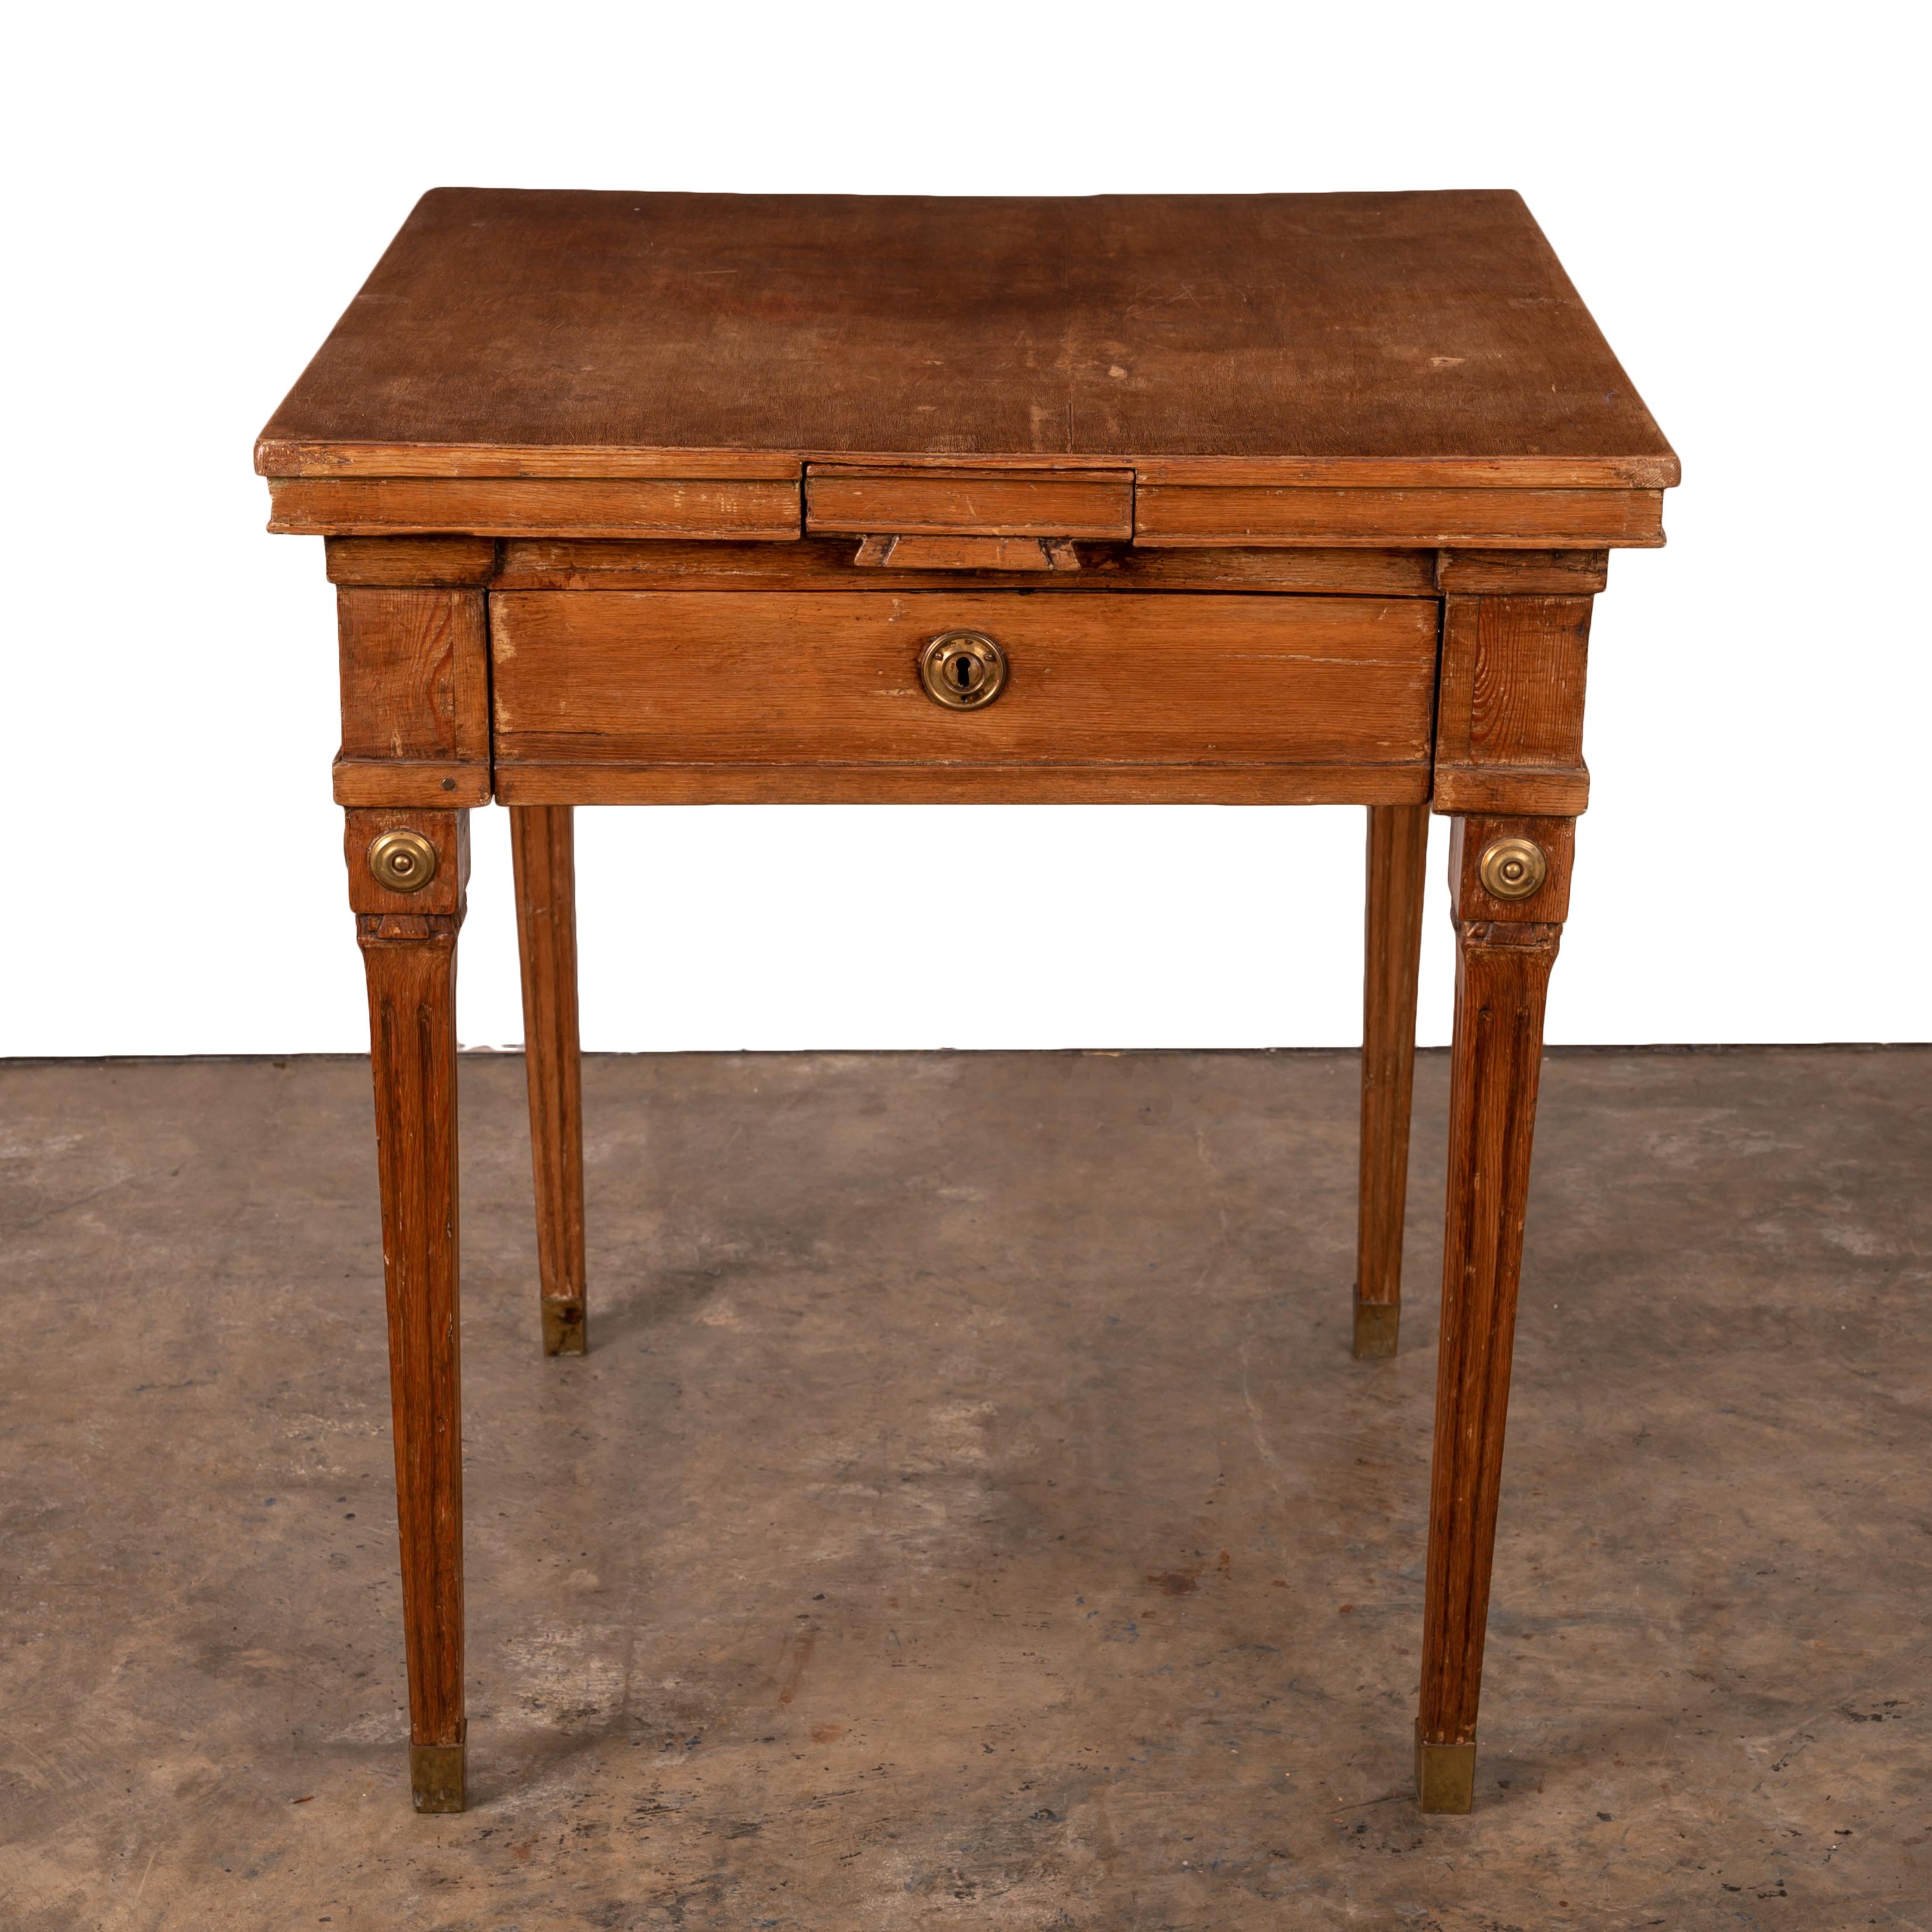 A fine Gustavian period ‘spelbord’ game table, 18th century.

Four small drawers on each side with one larger drawer; original brasses.

26 ¼ inches wide by 26 ¼ inches deep by 30 inches tall

